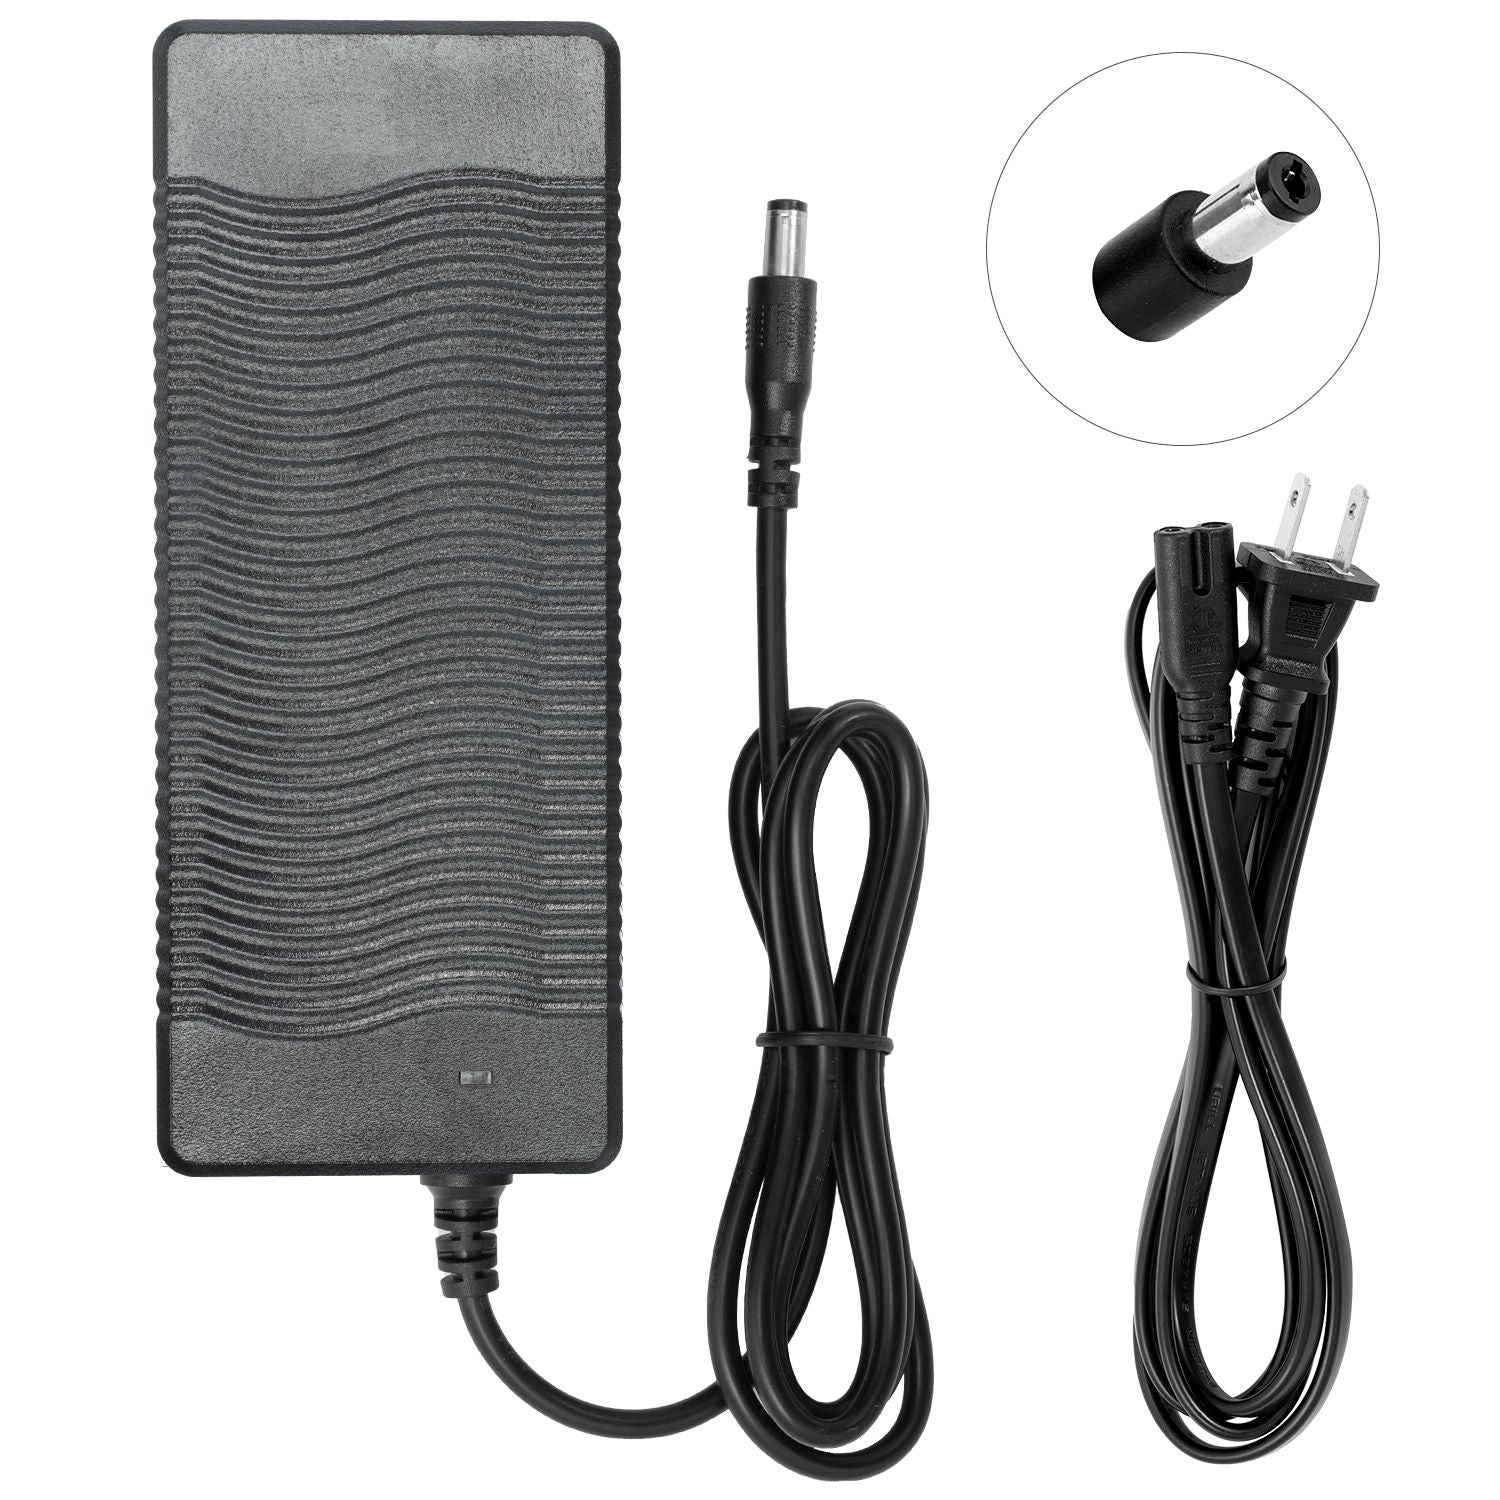 Charger for Amego Infinite Electric Bike